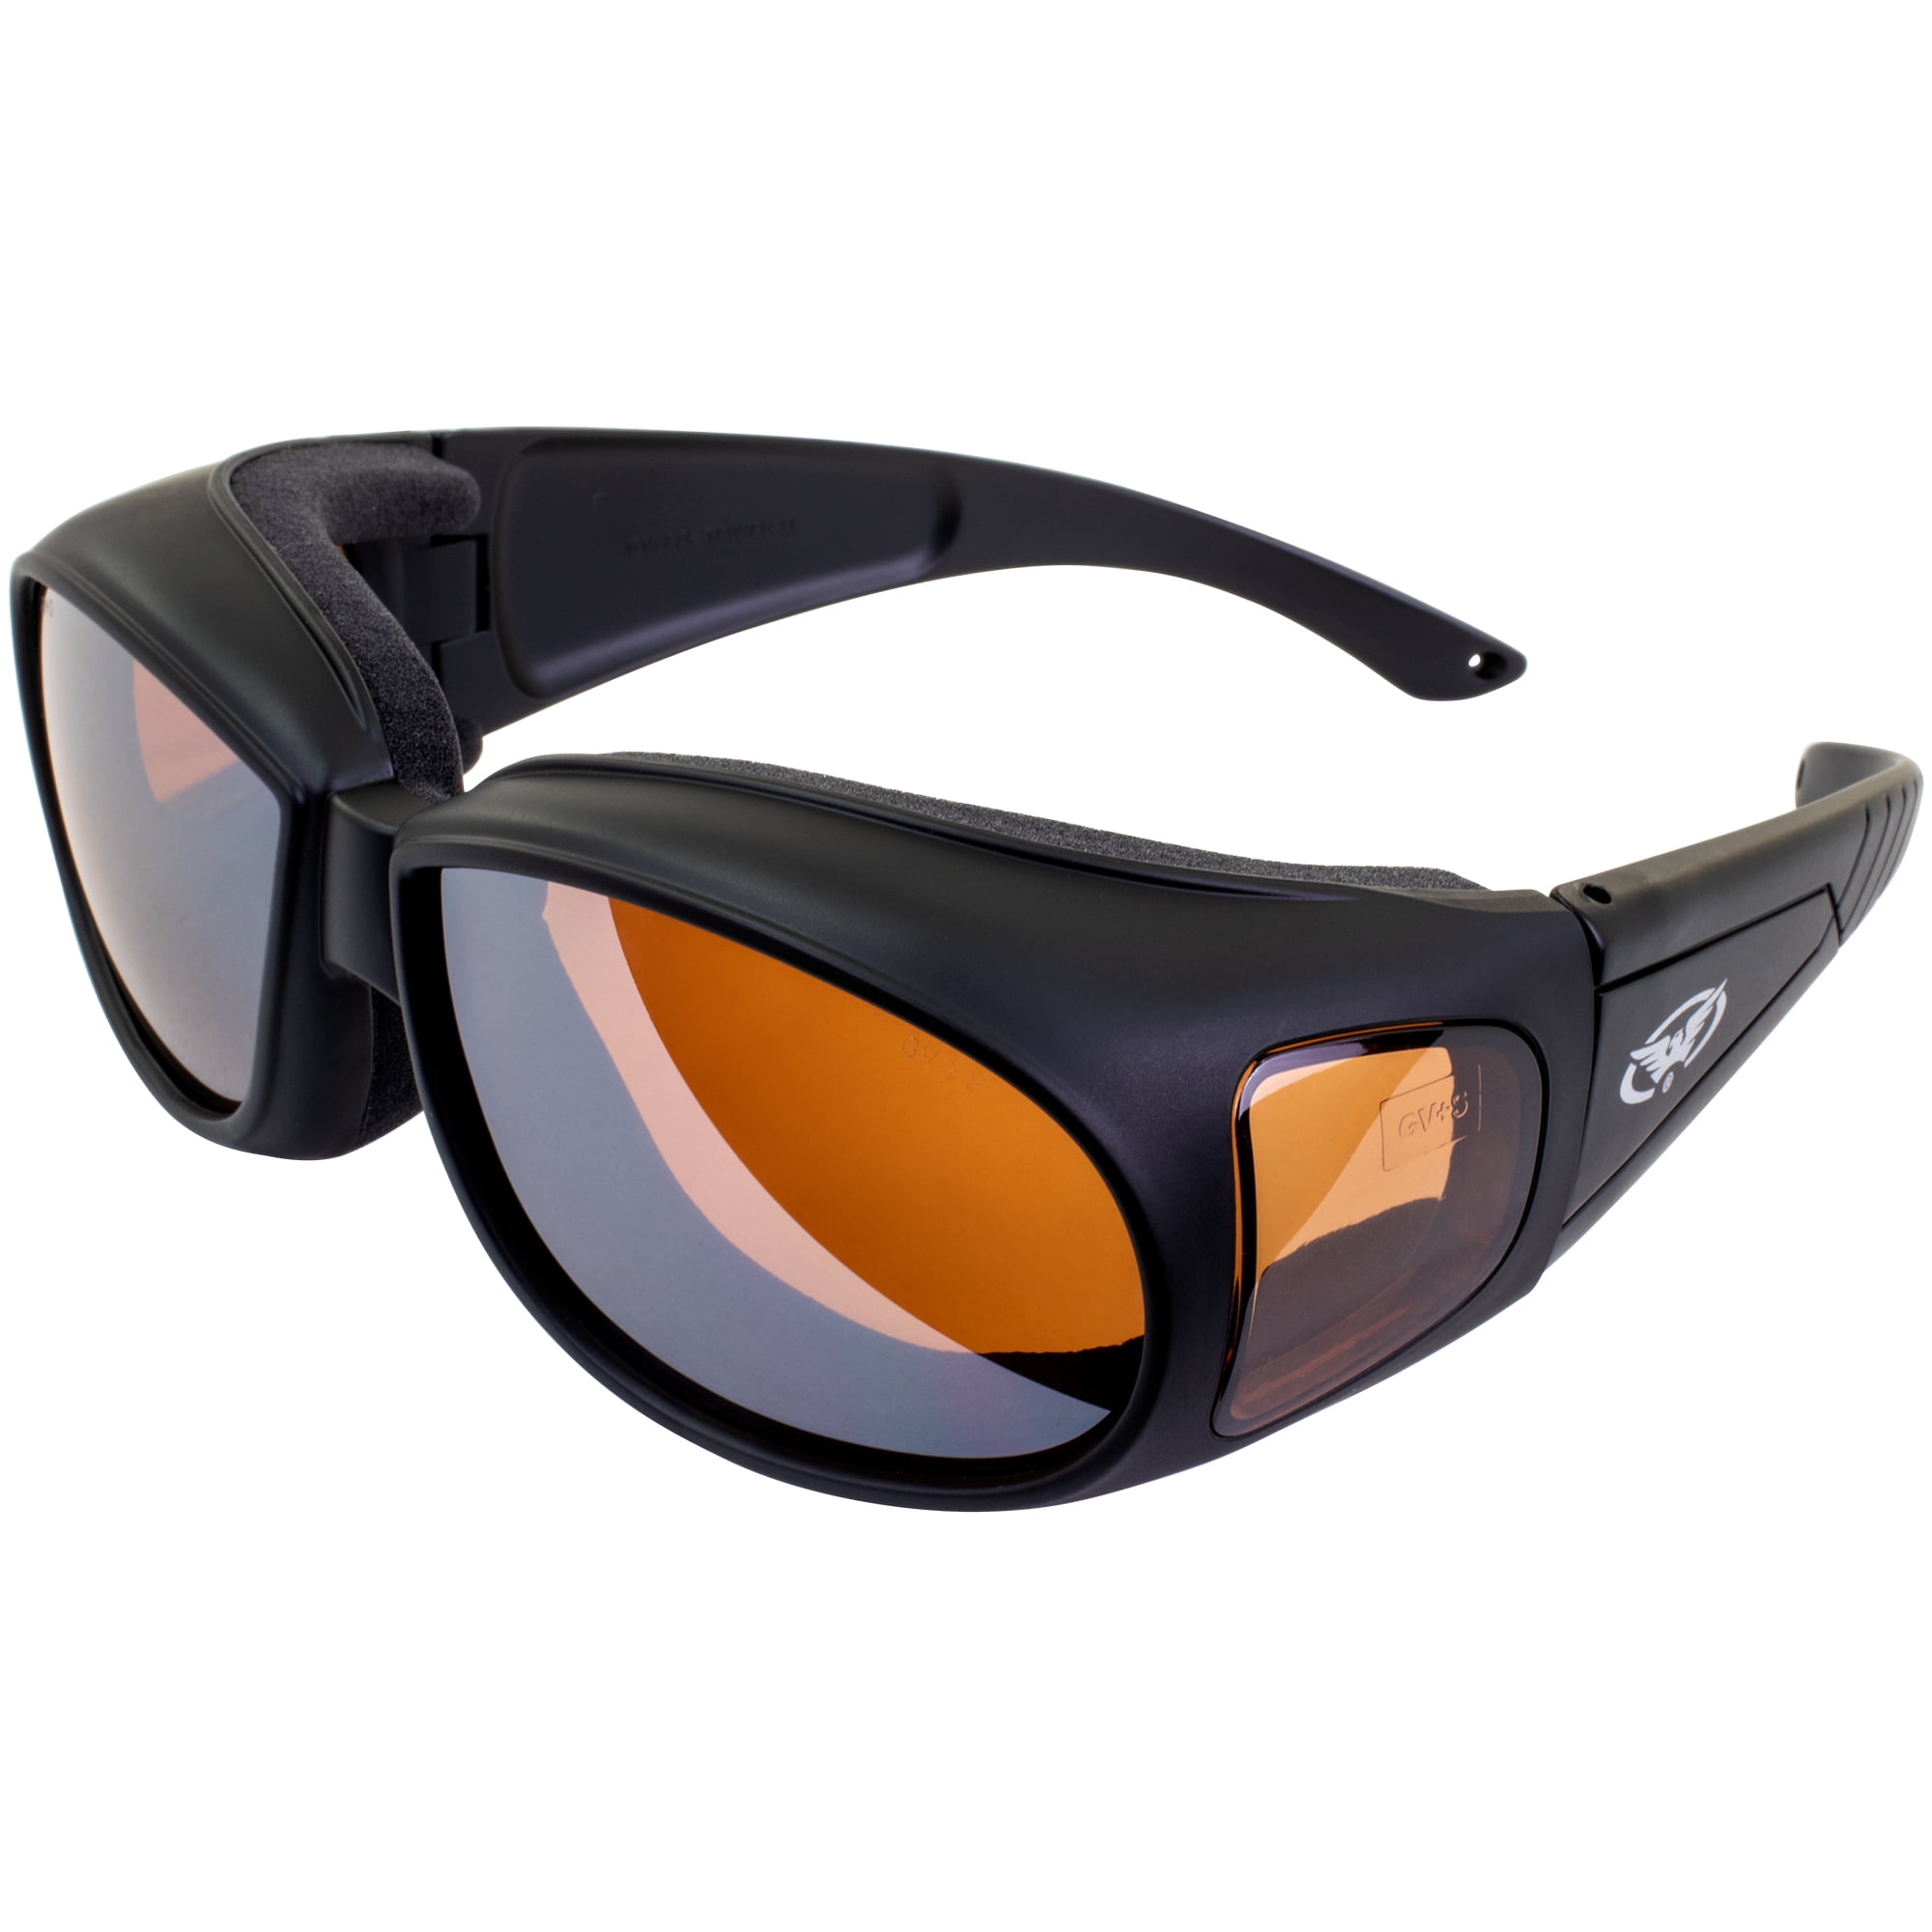 Global Vision Outfitter Motorcycle Riding Safety Sunglasses Matte